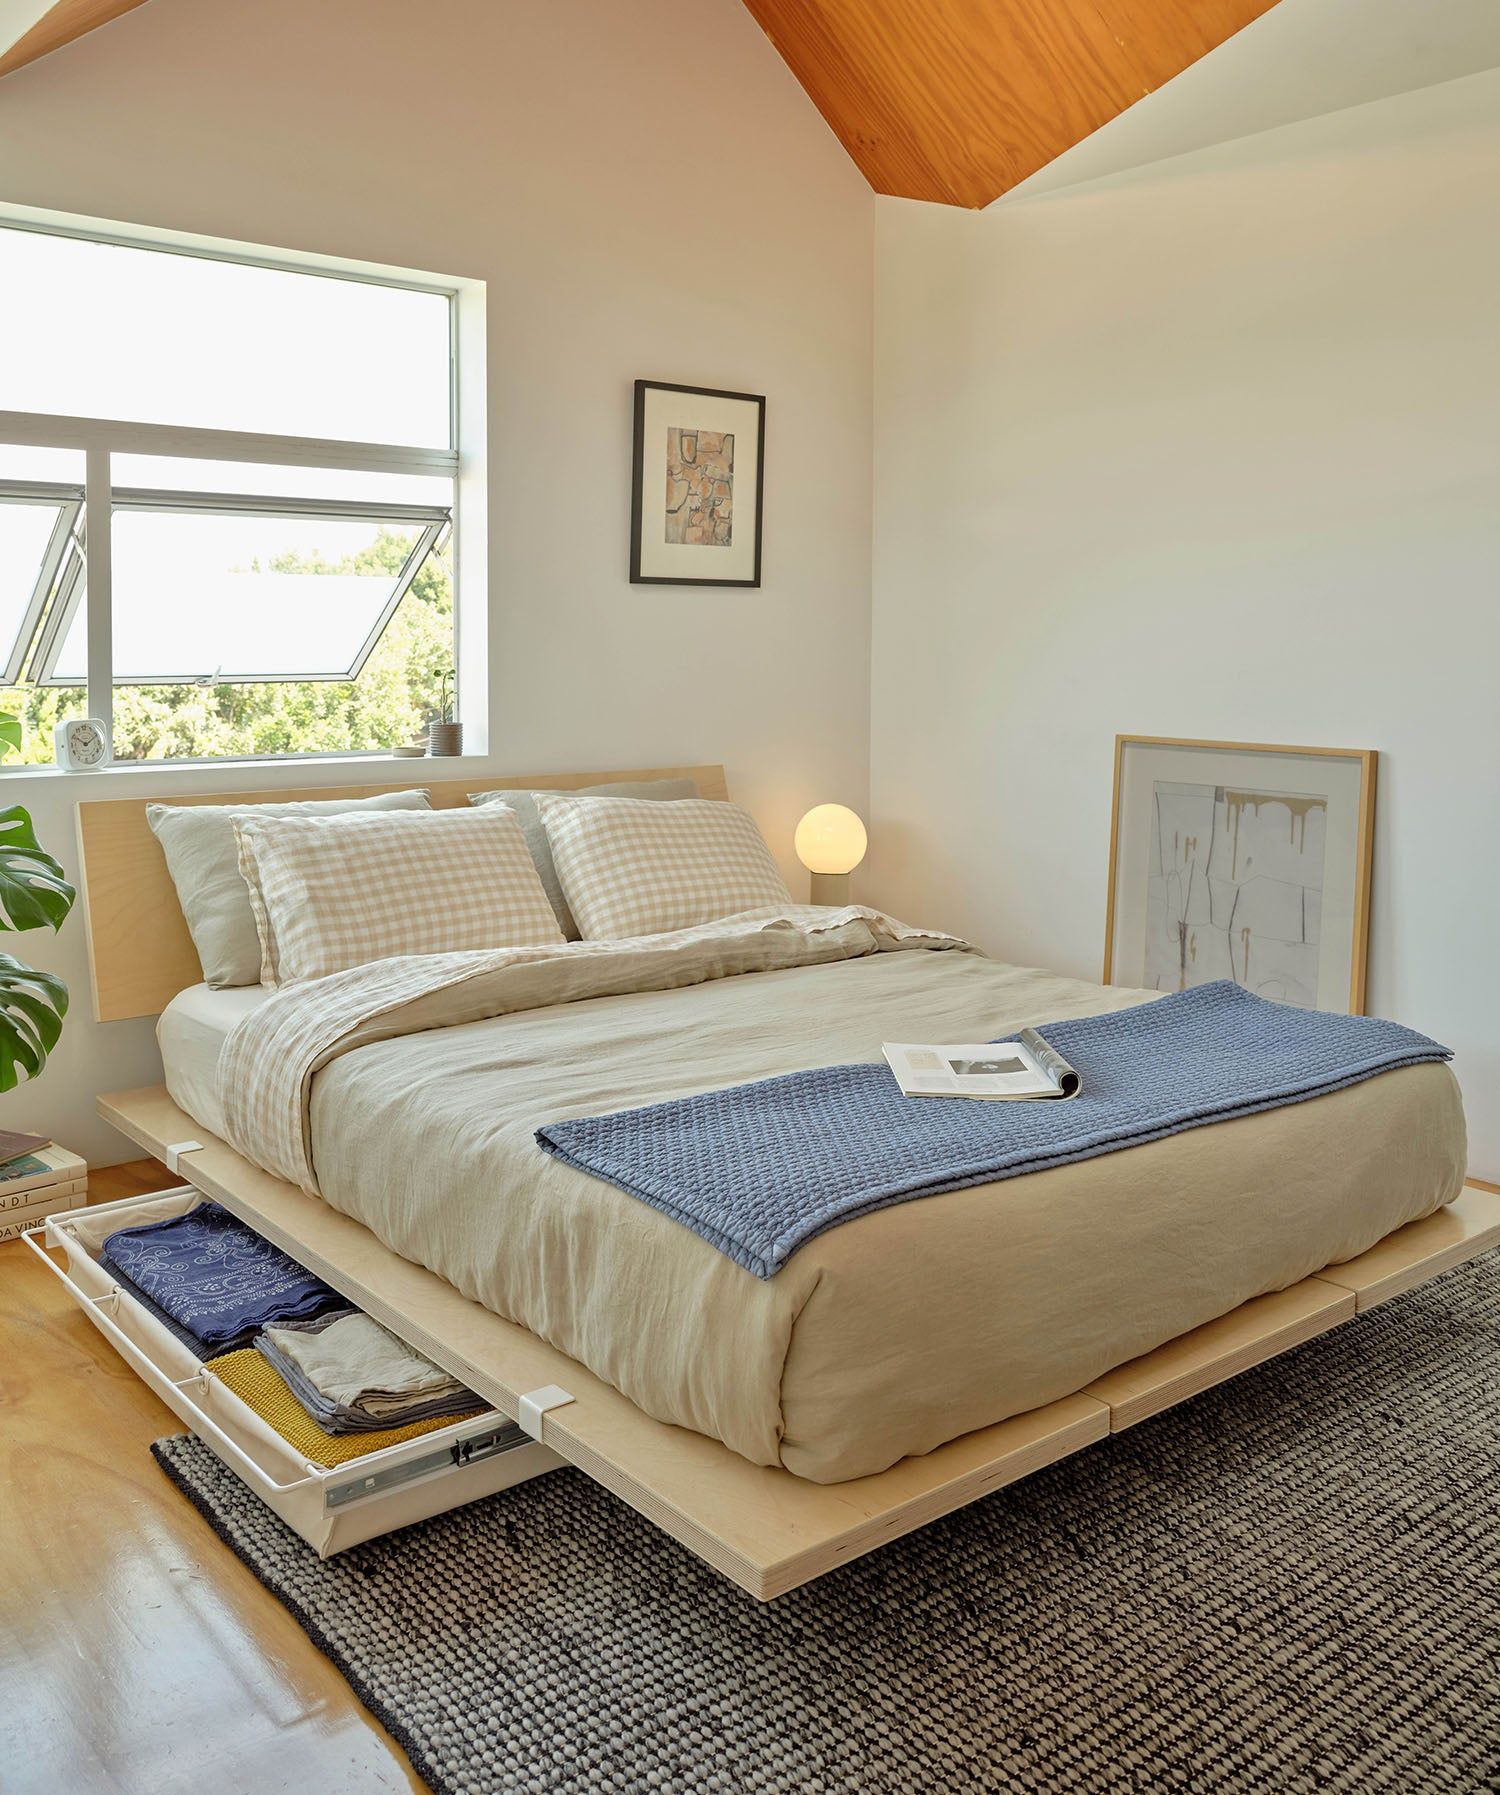 Bed Frames Upgrade Your Bedroom with These Stylish and Functional Bed Frame Alternatives